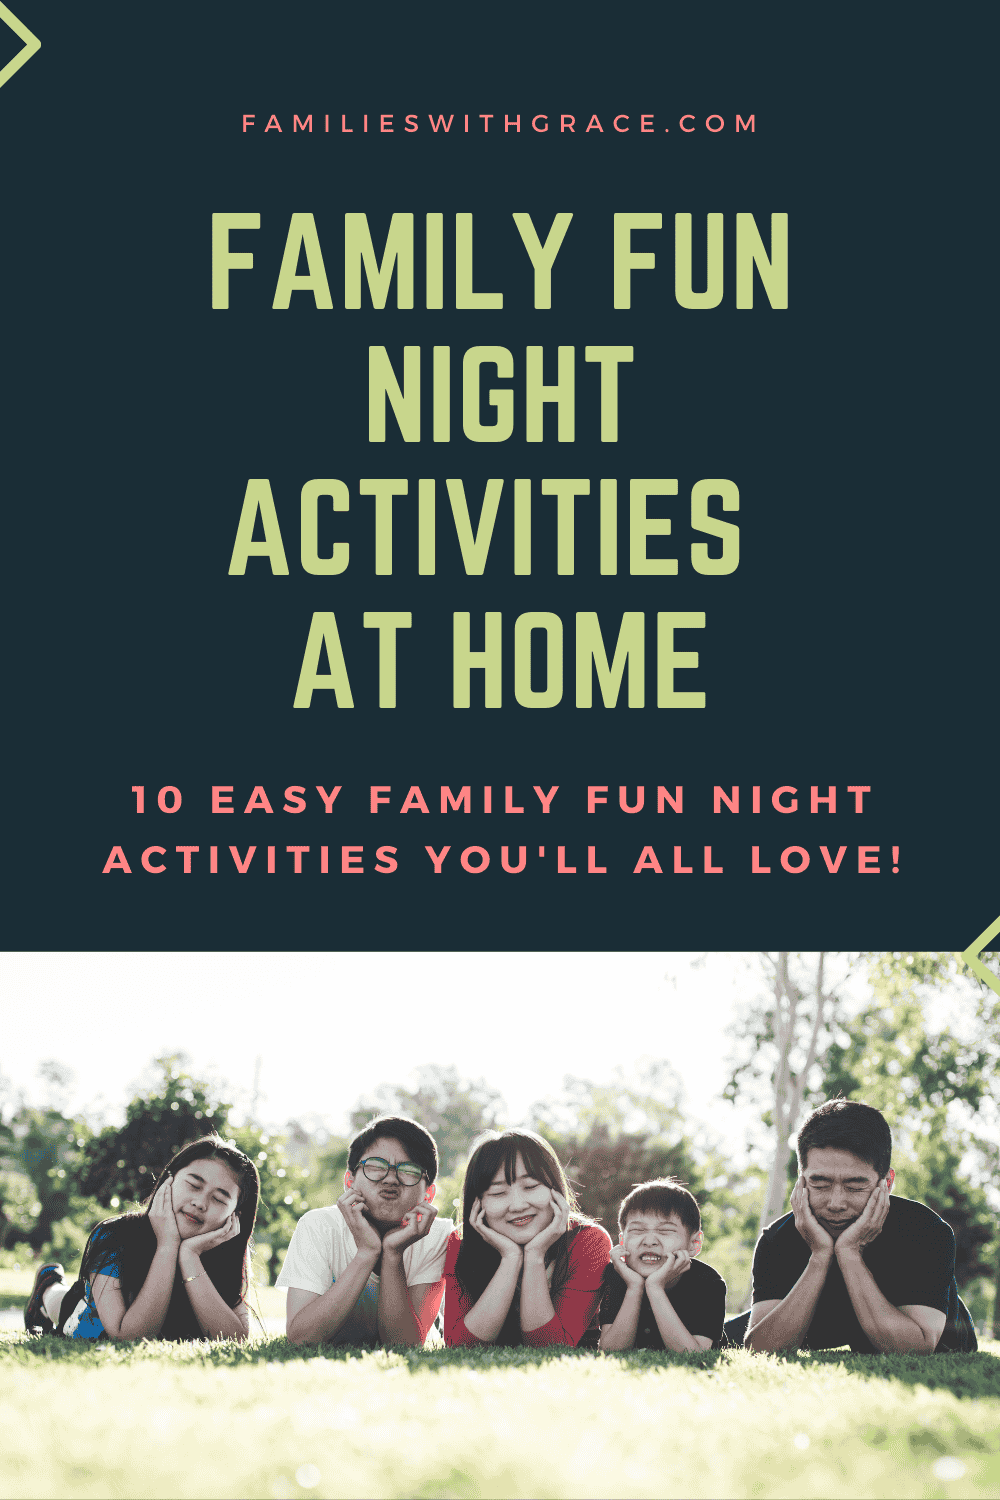 Family fun night activities at home